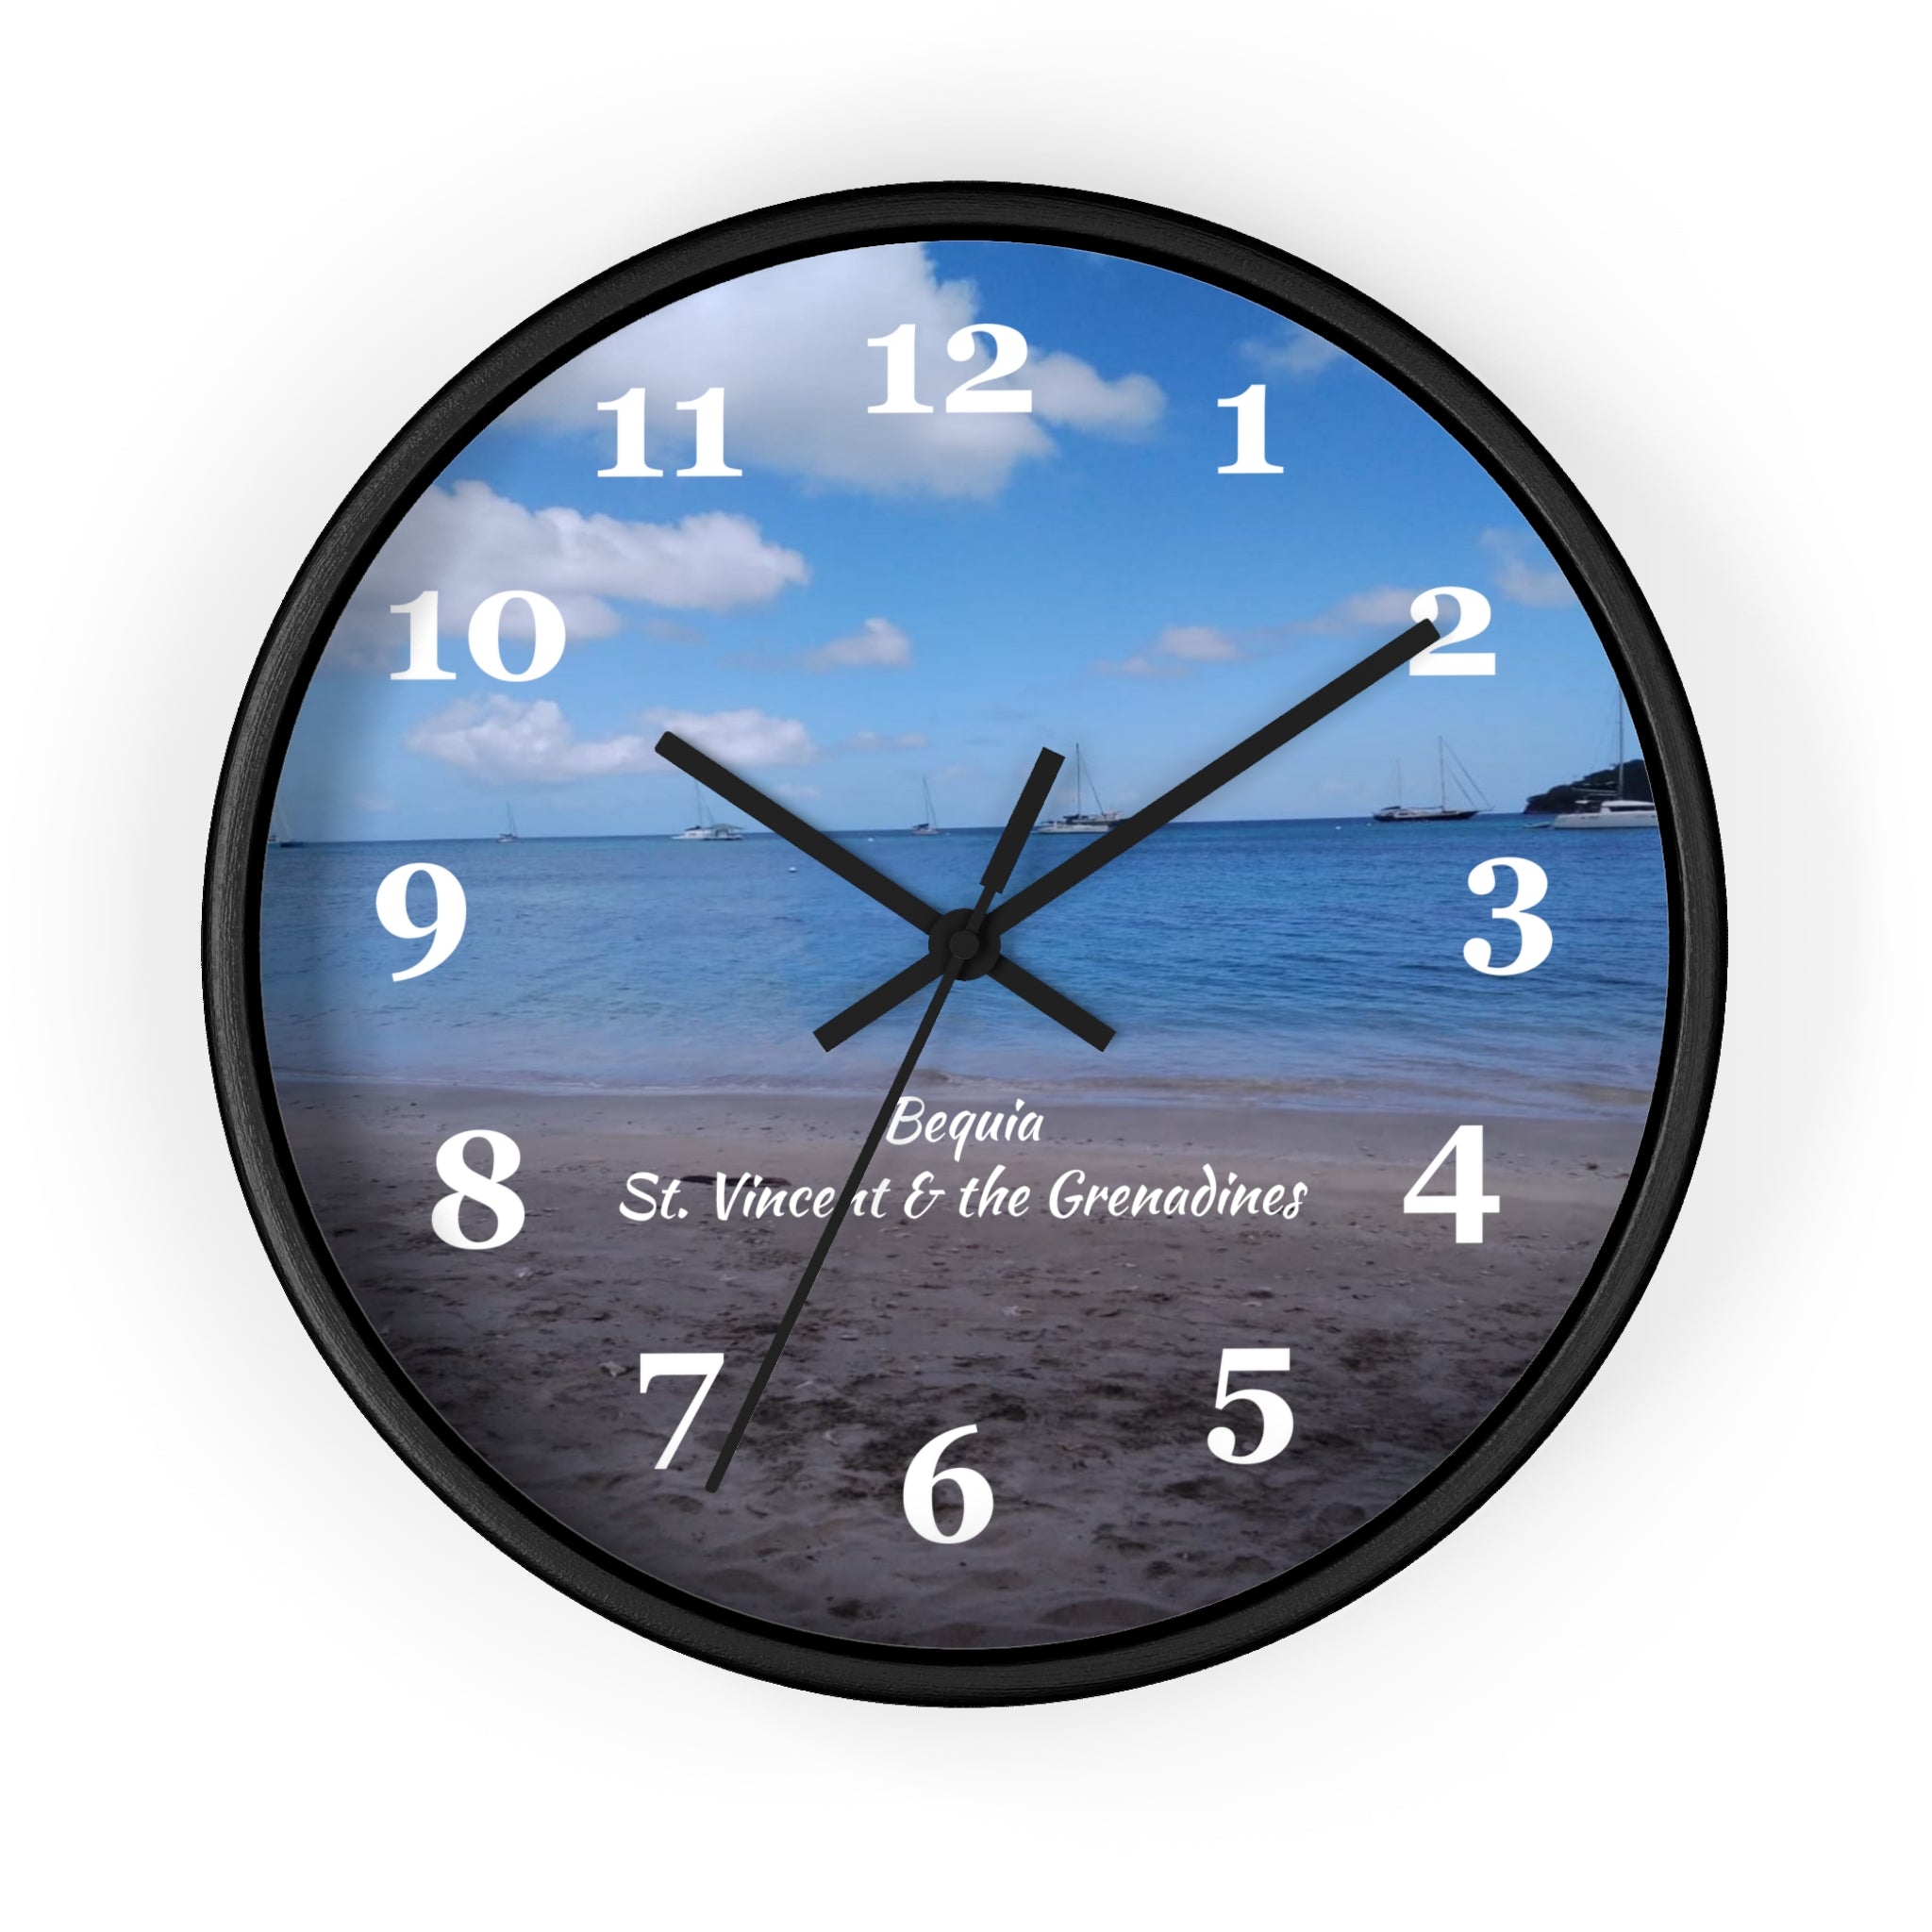 Bequia Beach St. Vincent and the Grenadines Wall Clock